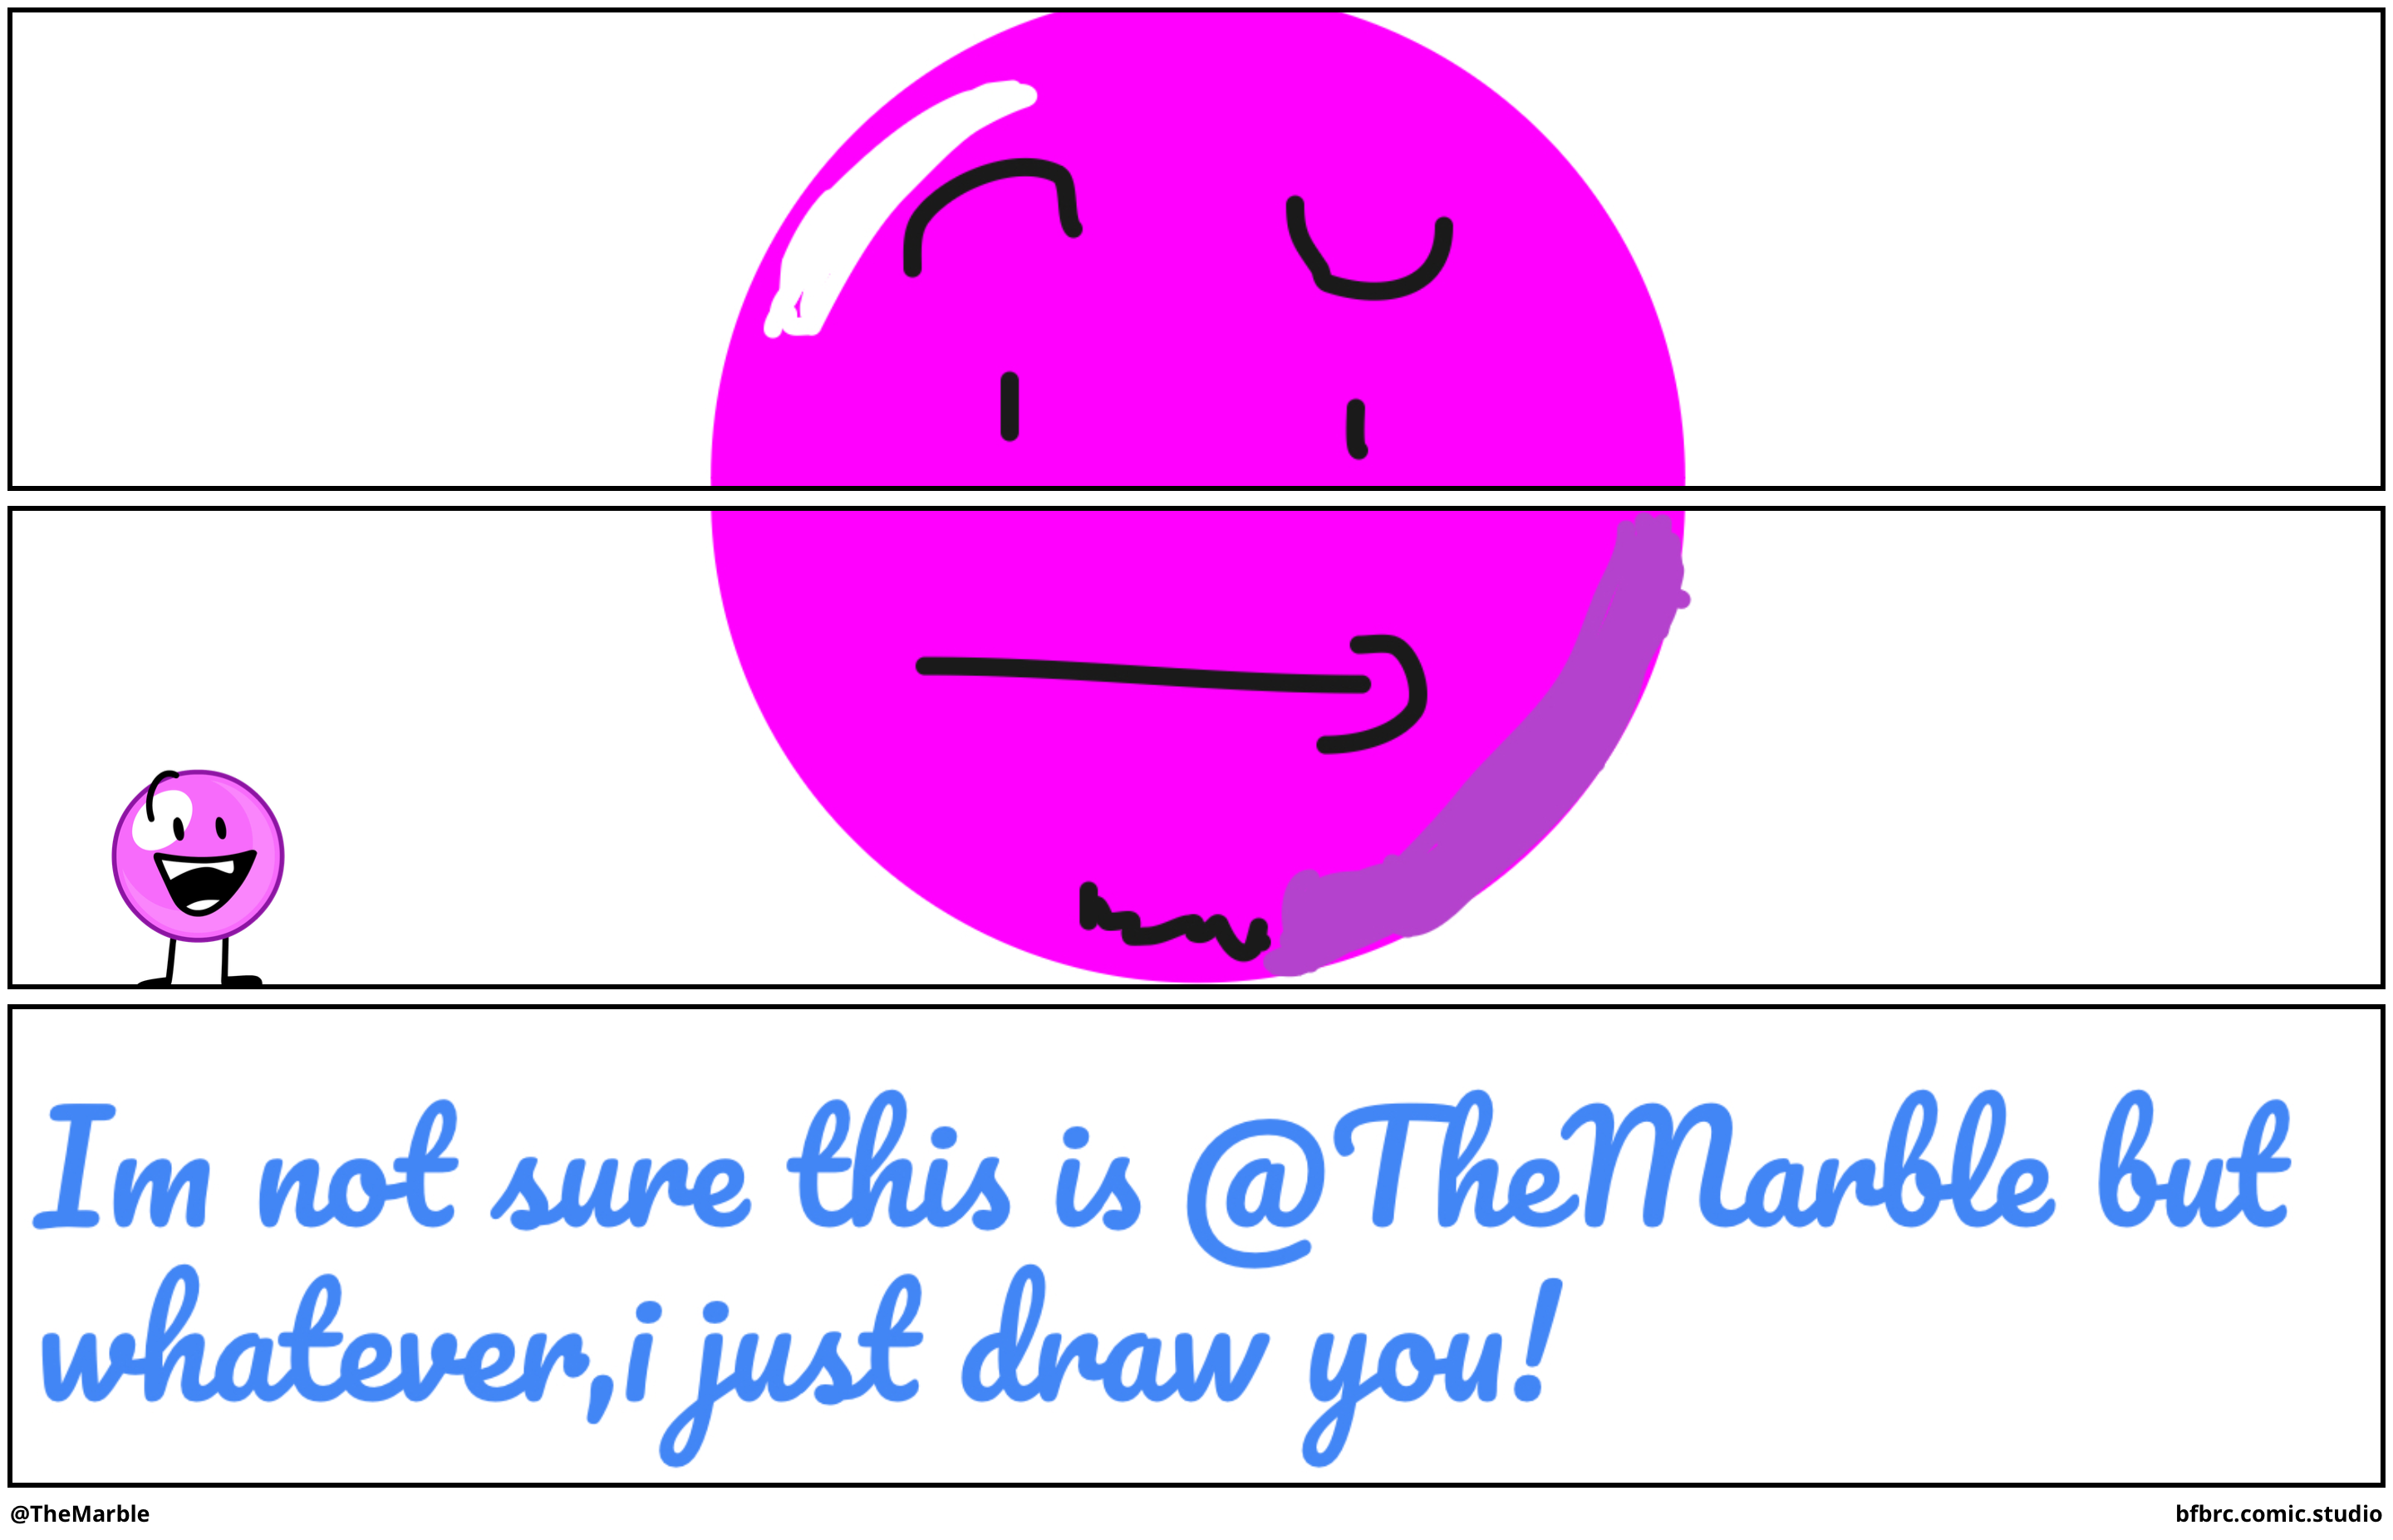 @TheMarble